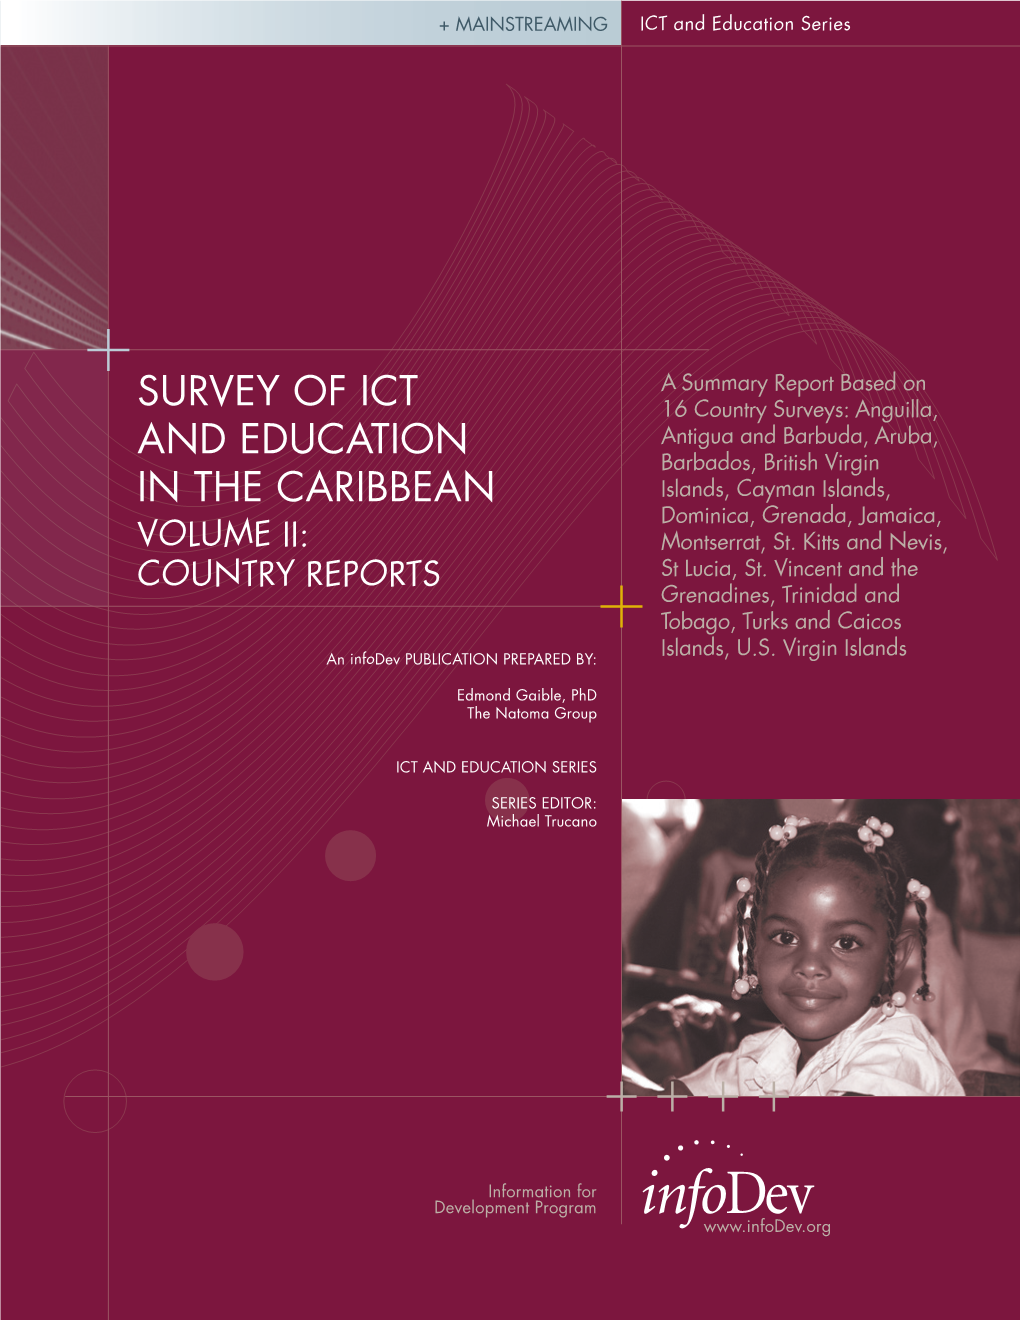 Survey of ICT and Education in the Caribbean